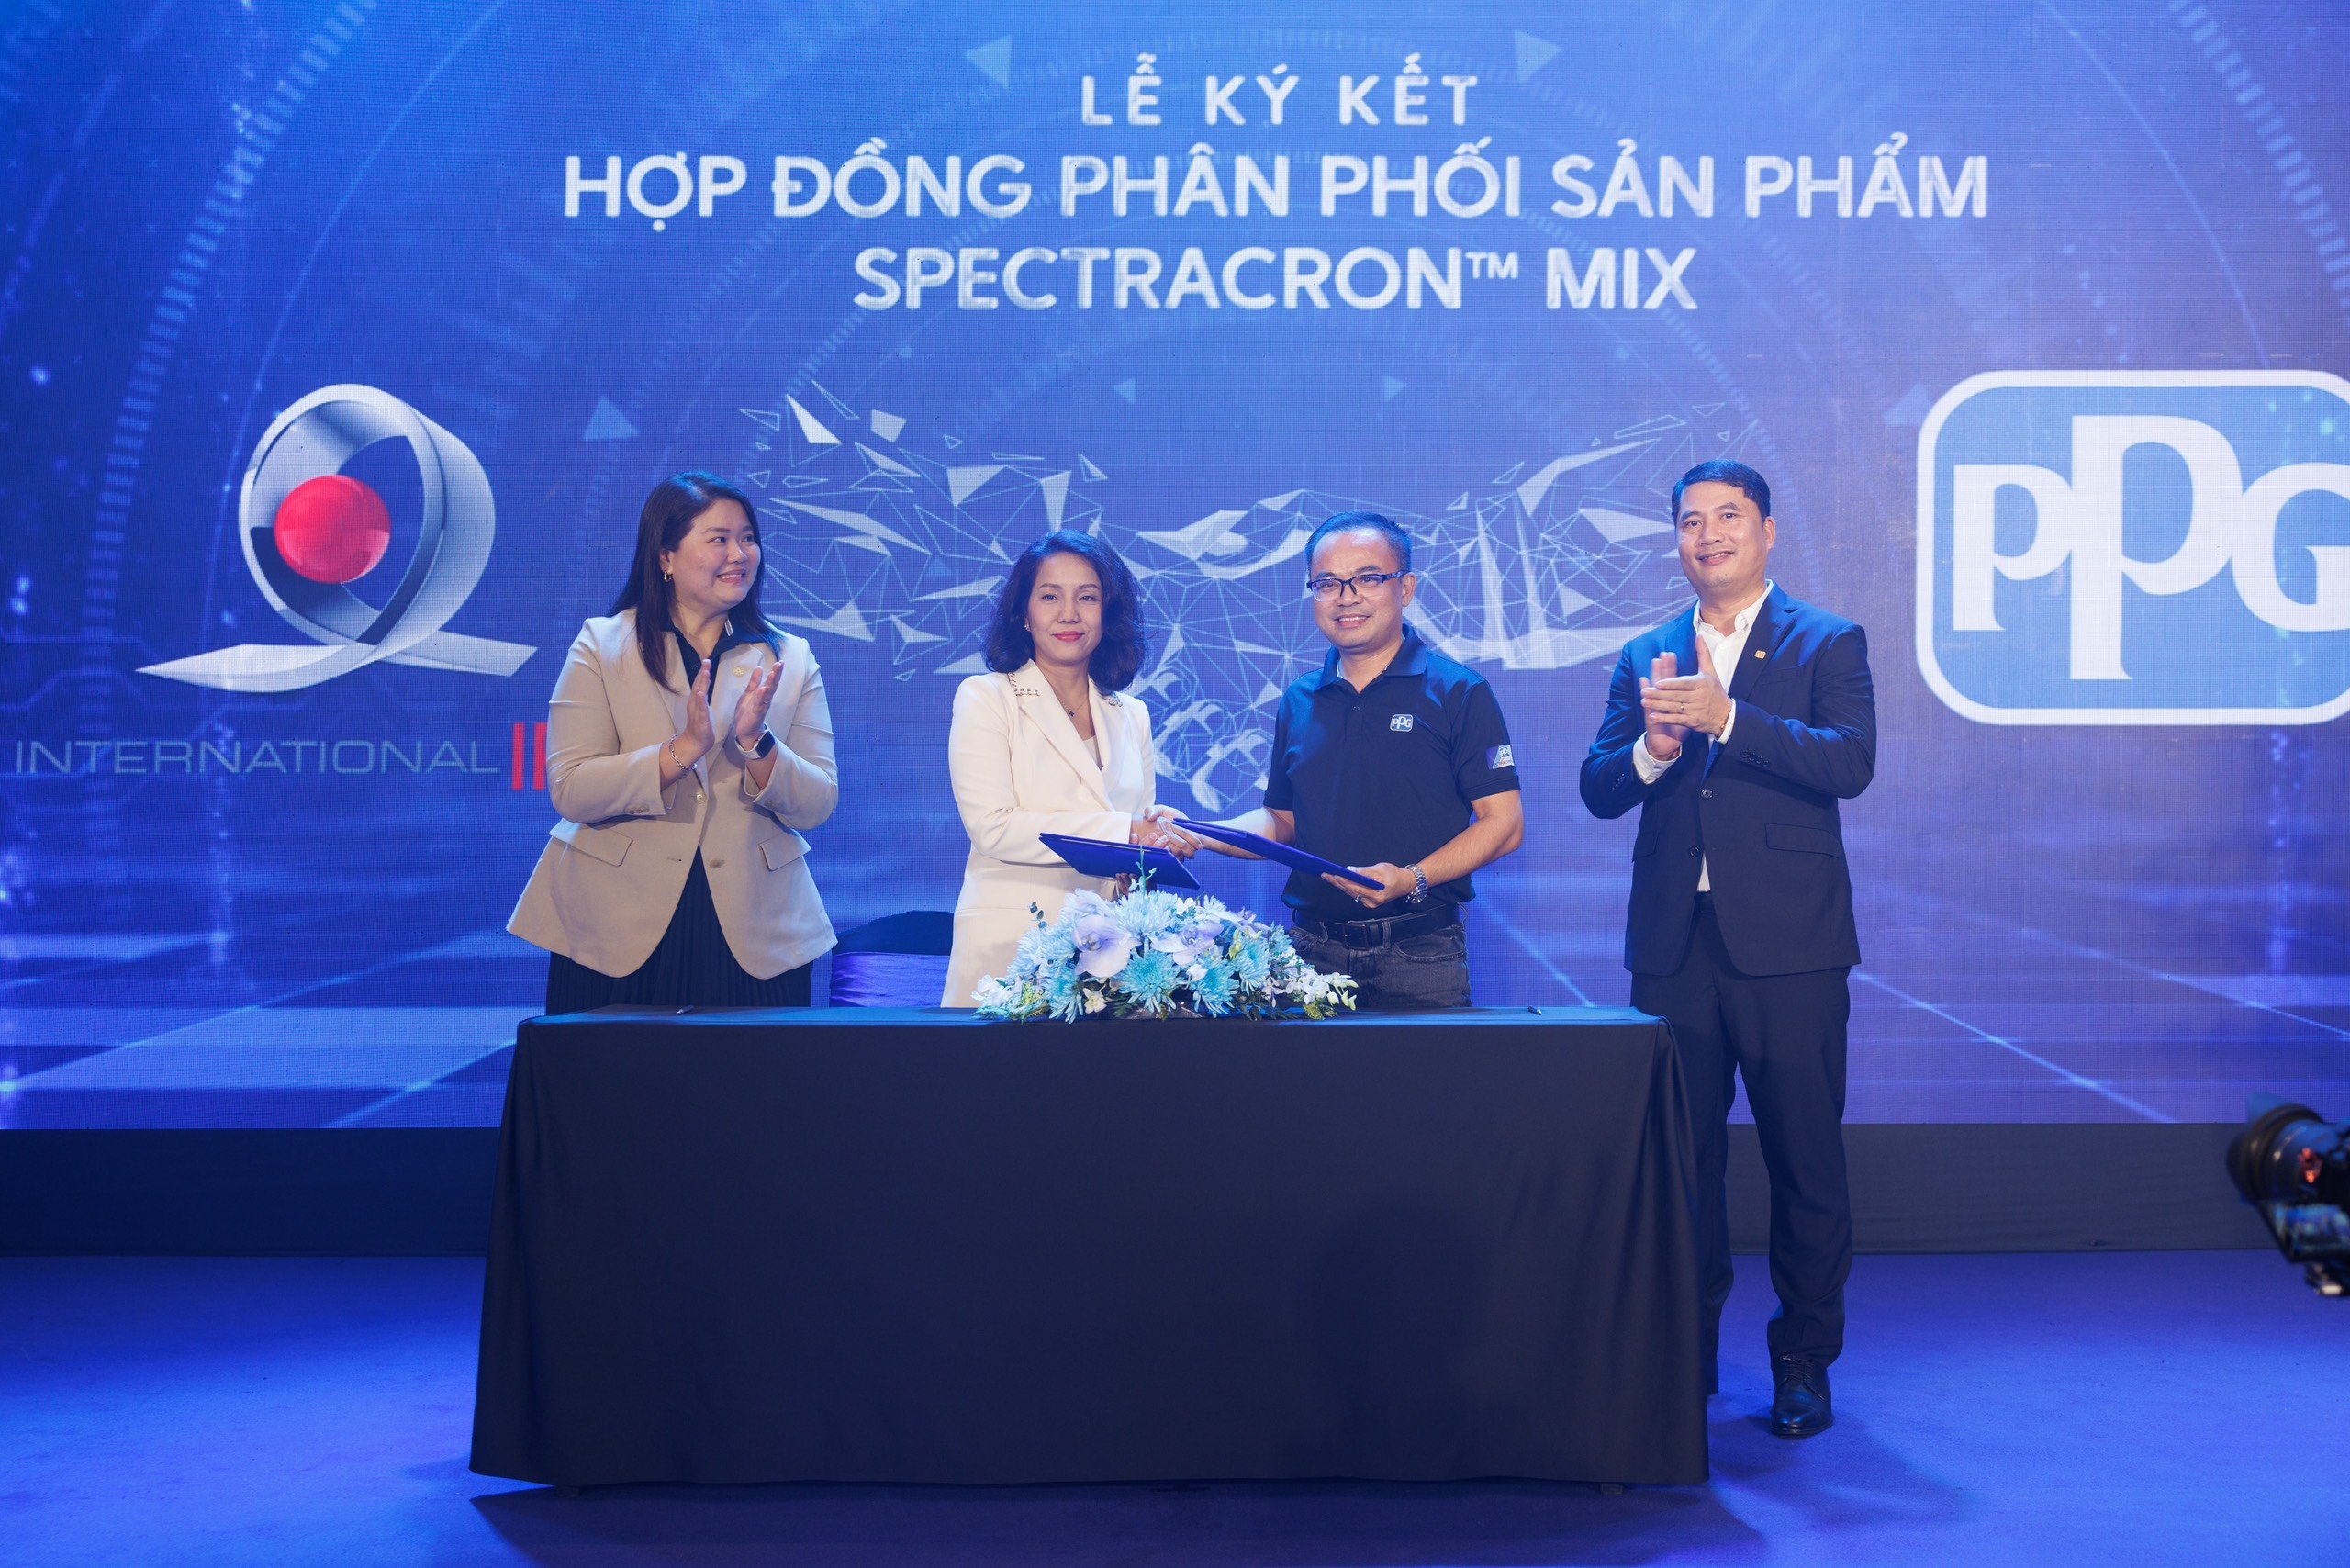 PPG Spectracron™ Mix brings paint mixing innovation to Vietnam